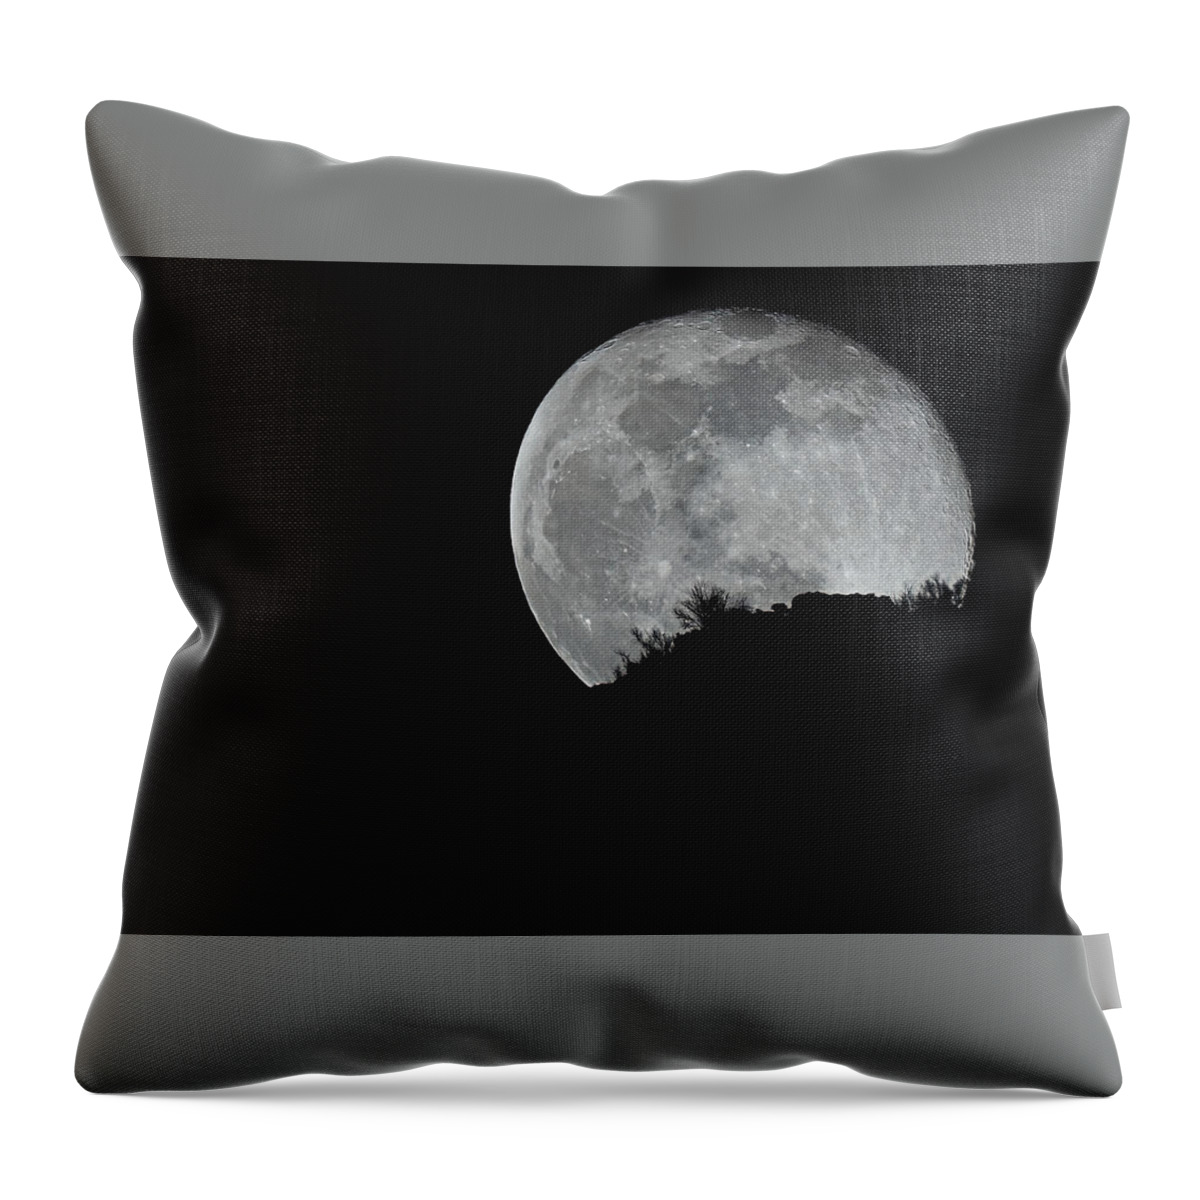  Throw Pillow featuring the photograph Sedona Moonrise by Al Judge